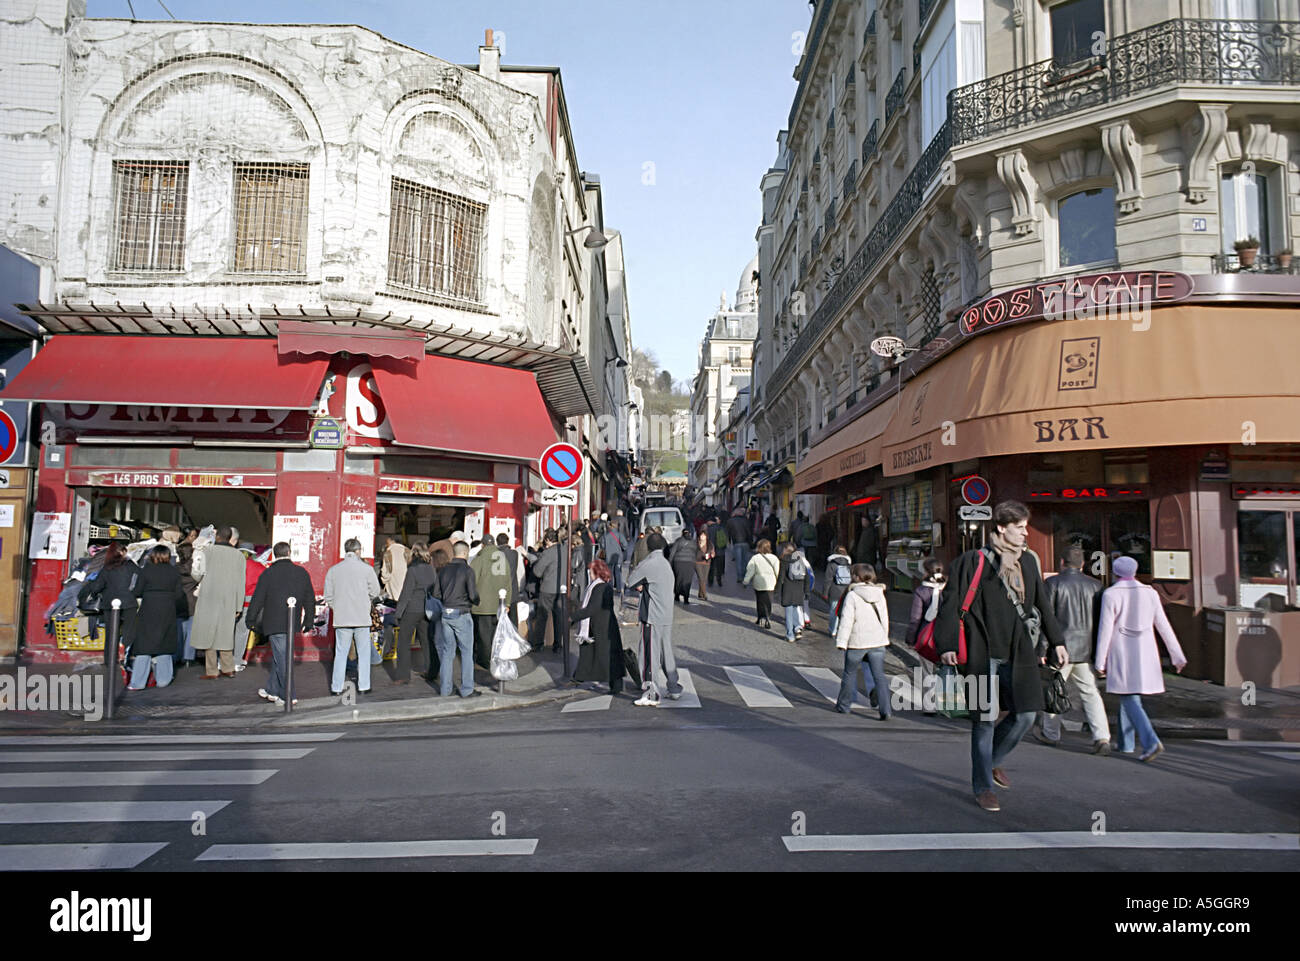 Shoppers crowd the sidewalks of Belleville Paris during the winter sales Stock Photo